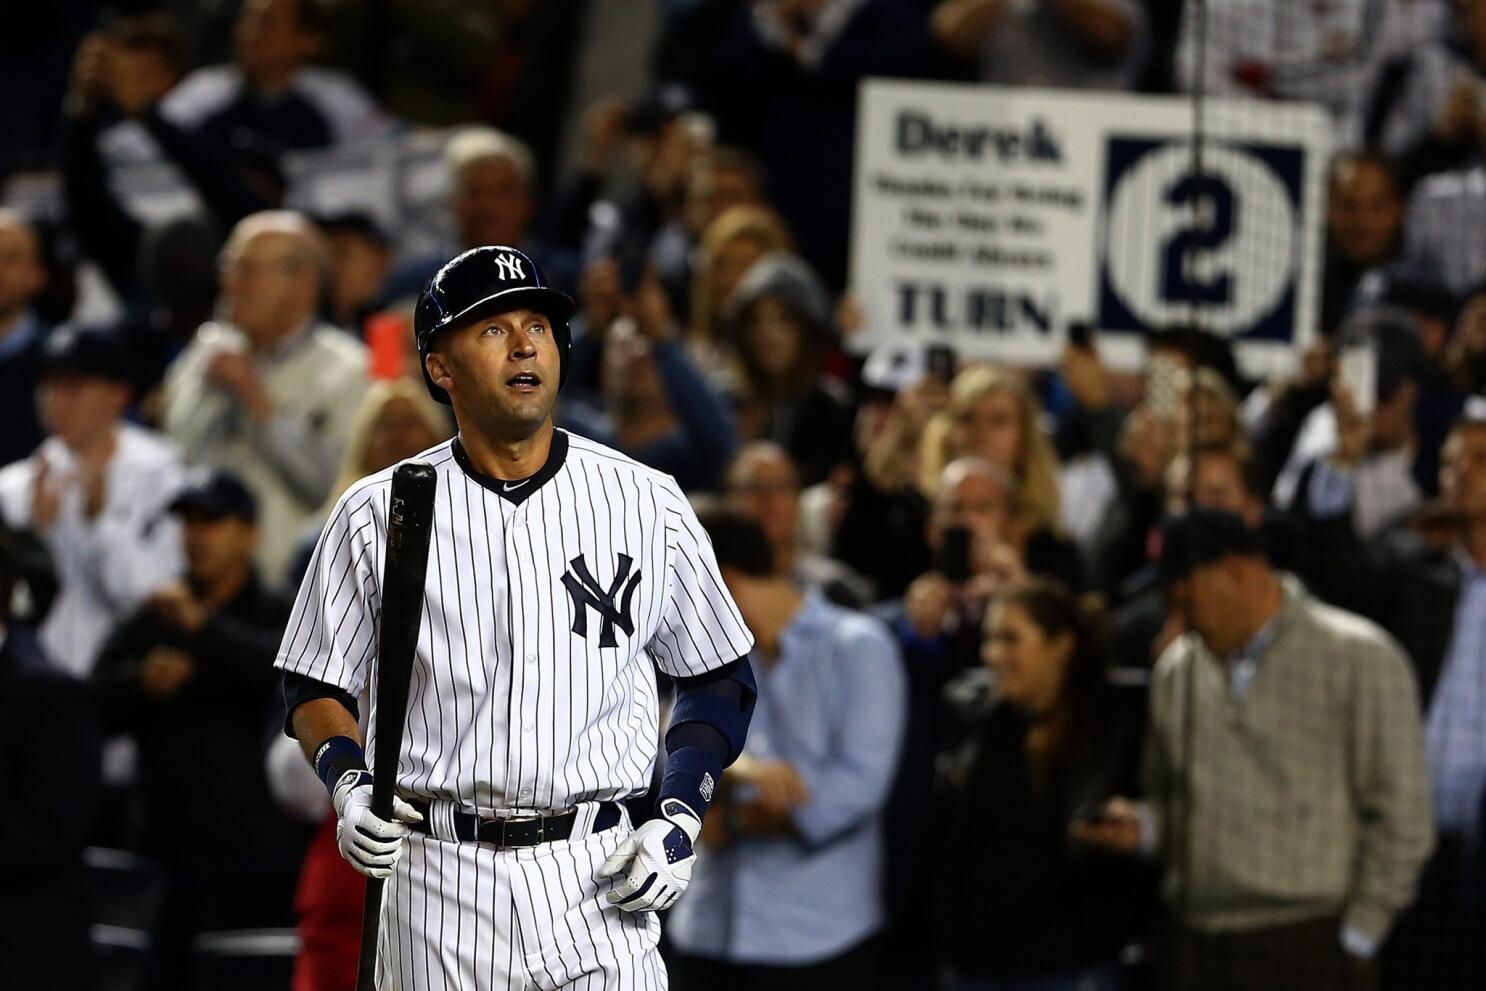 Business as usual for Derek Jeter in final home opener